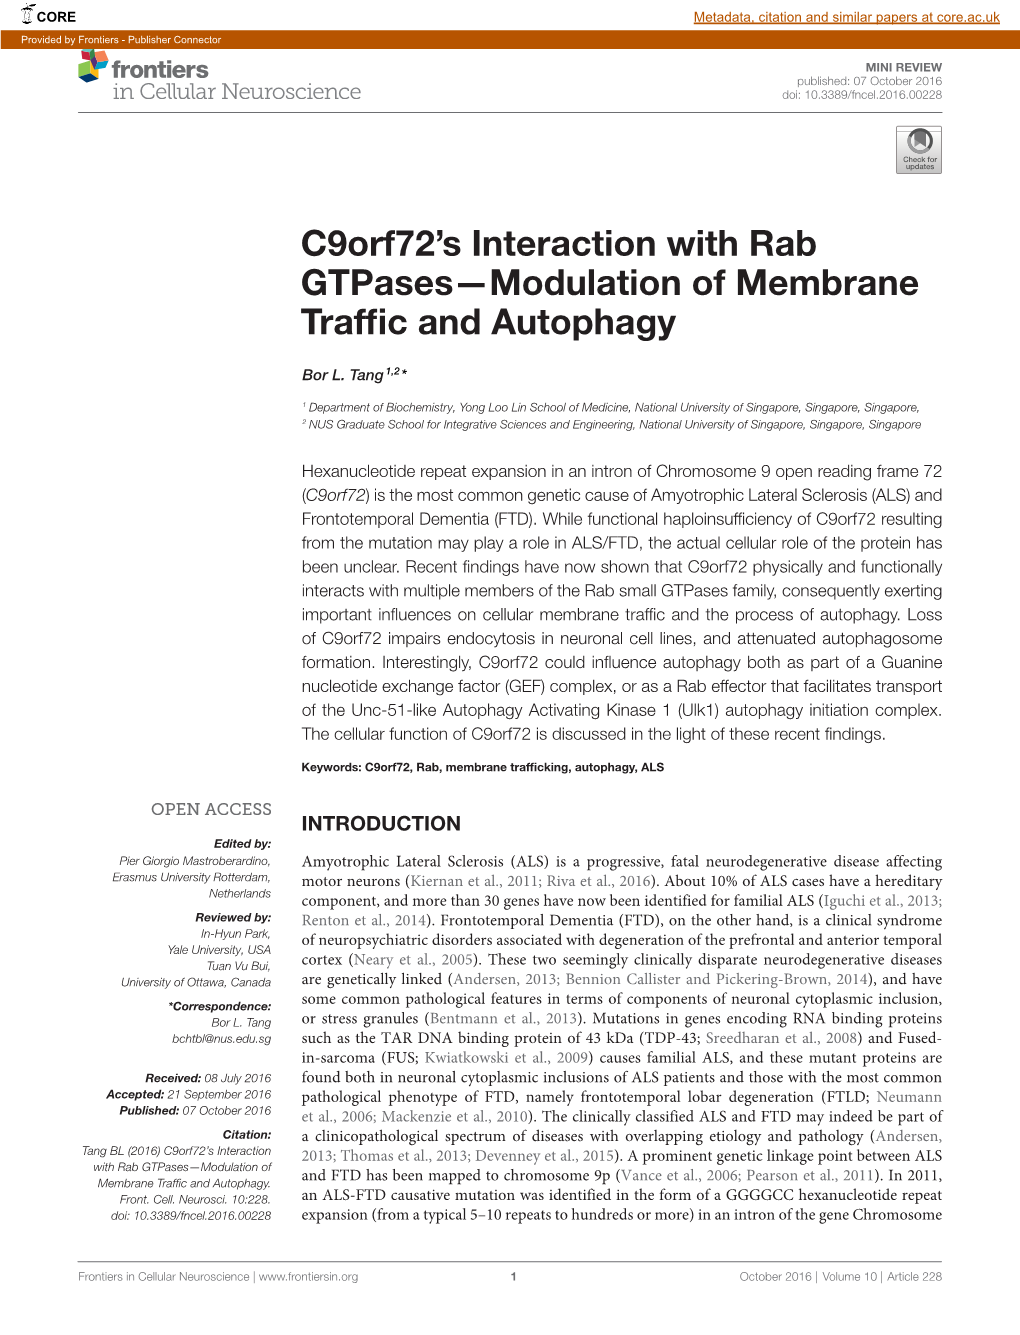 C9orf72's Interaction with Rab Gtpases—Modulation Of